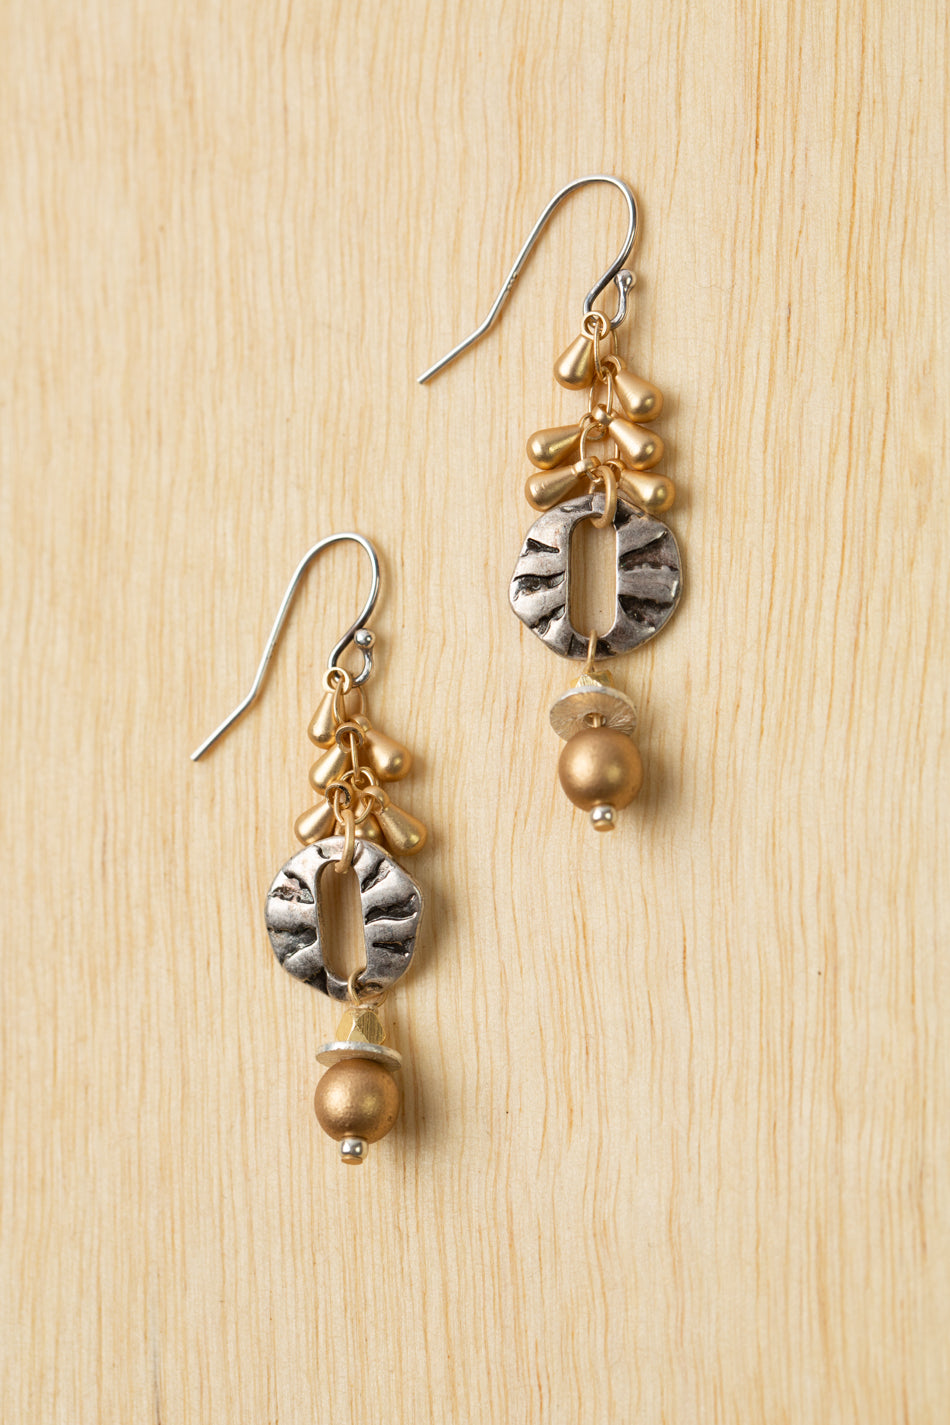 Silver & Gold Mixed Metal Earrings (limited)